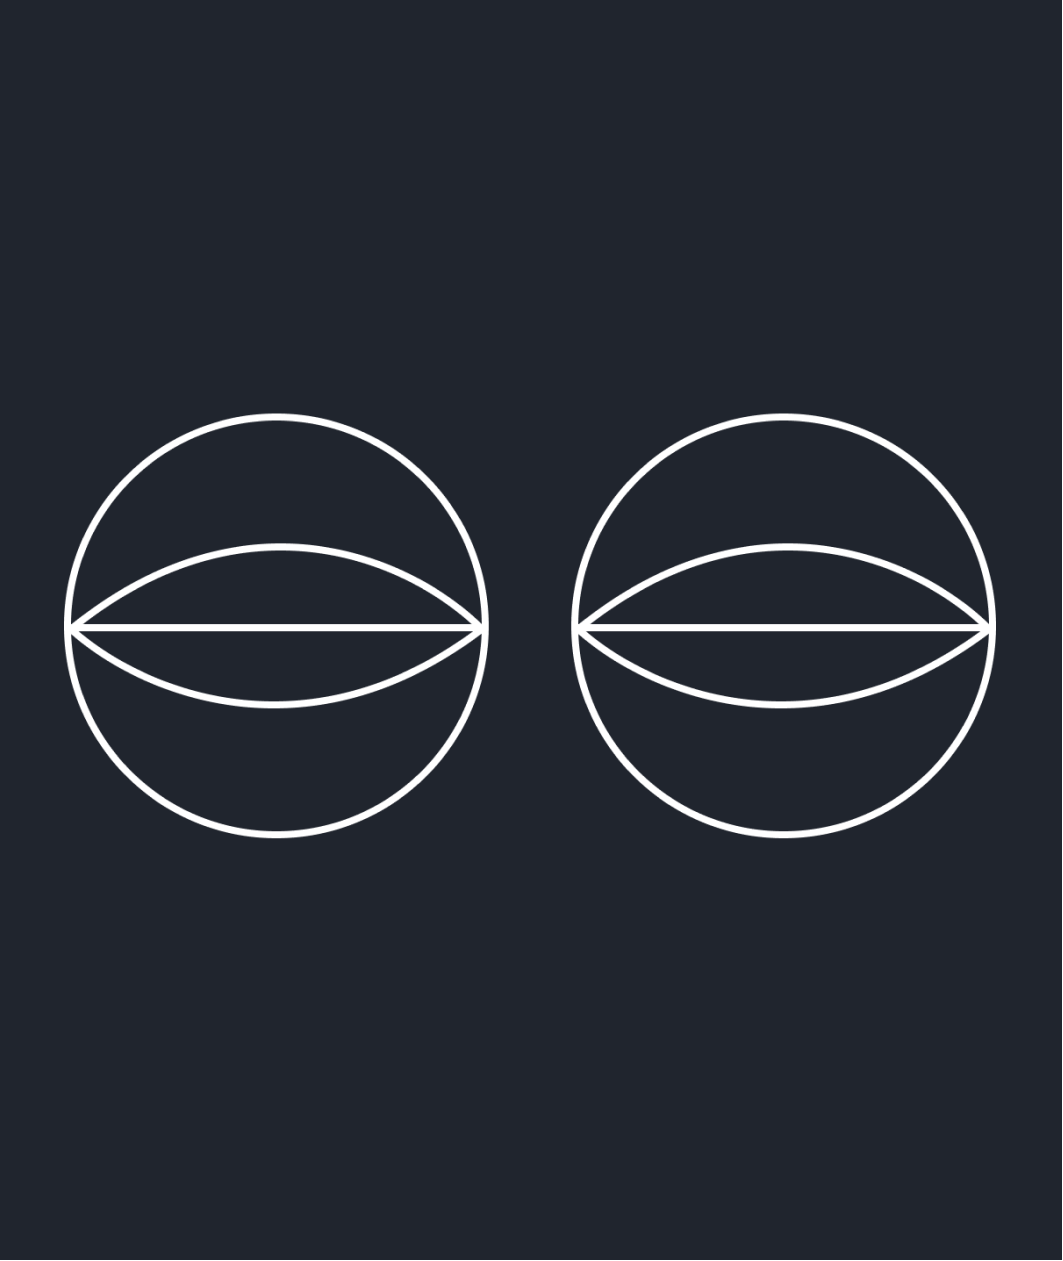 A abstract line drawing of two eyes on black background.